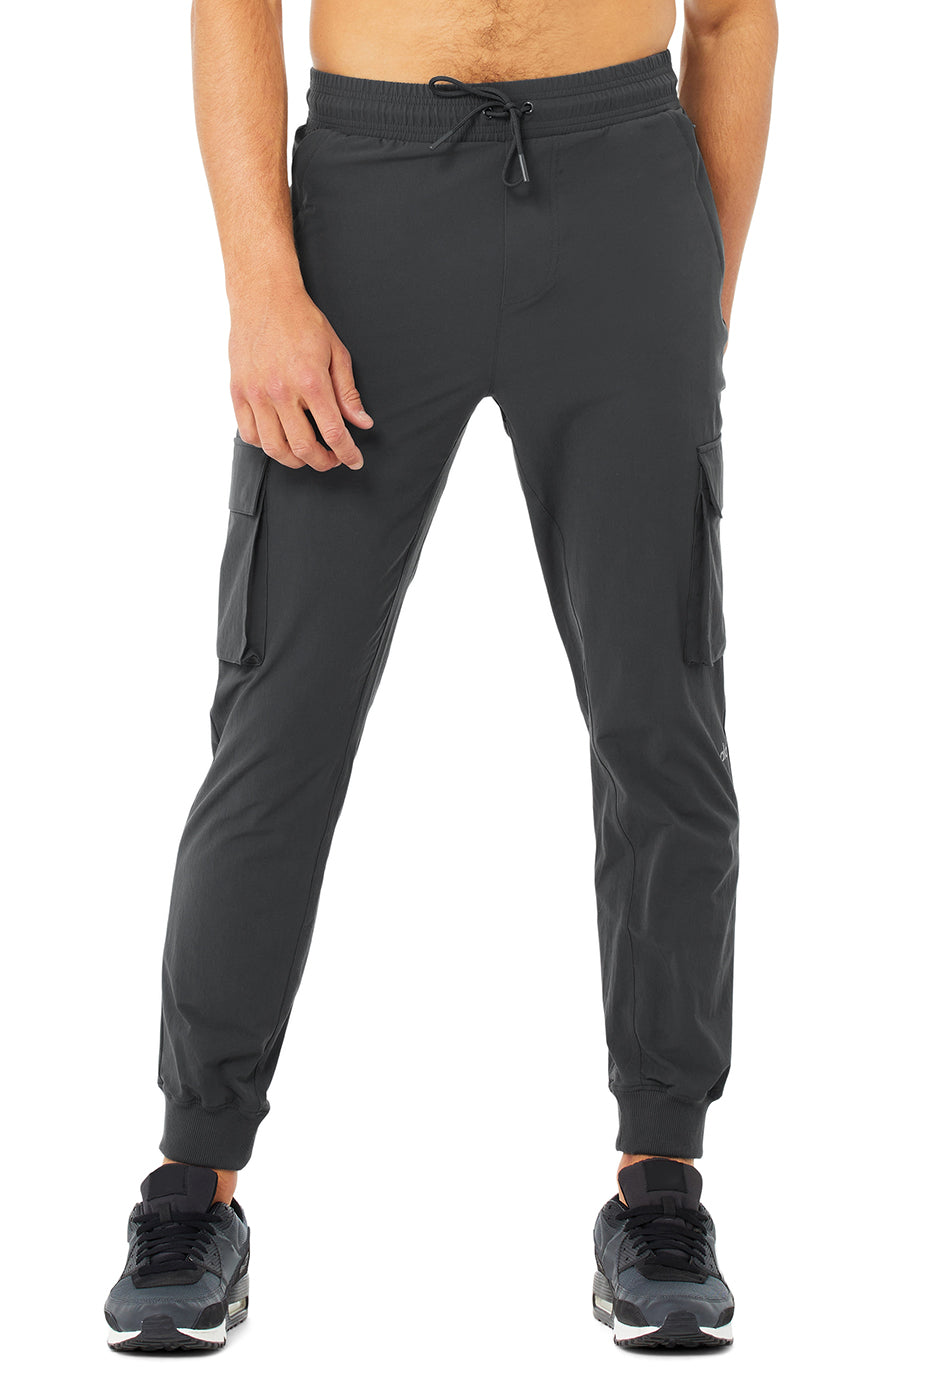 Cargo Division Field Pants in Anthracite by Alo Yoga